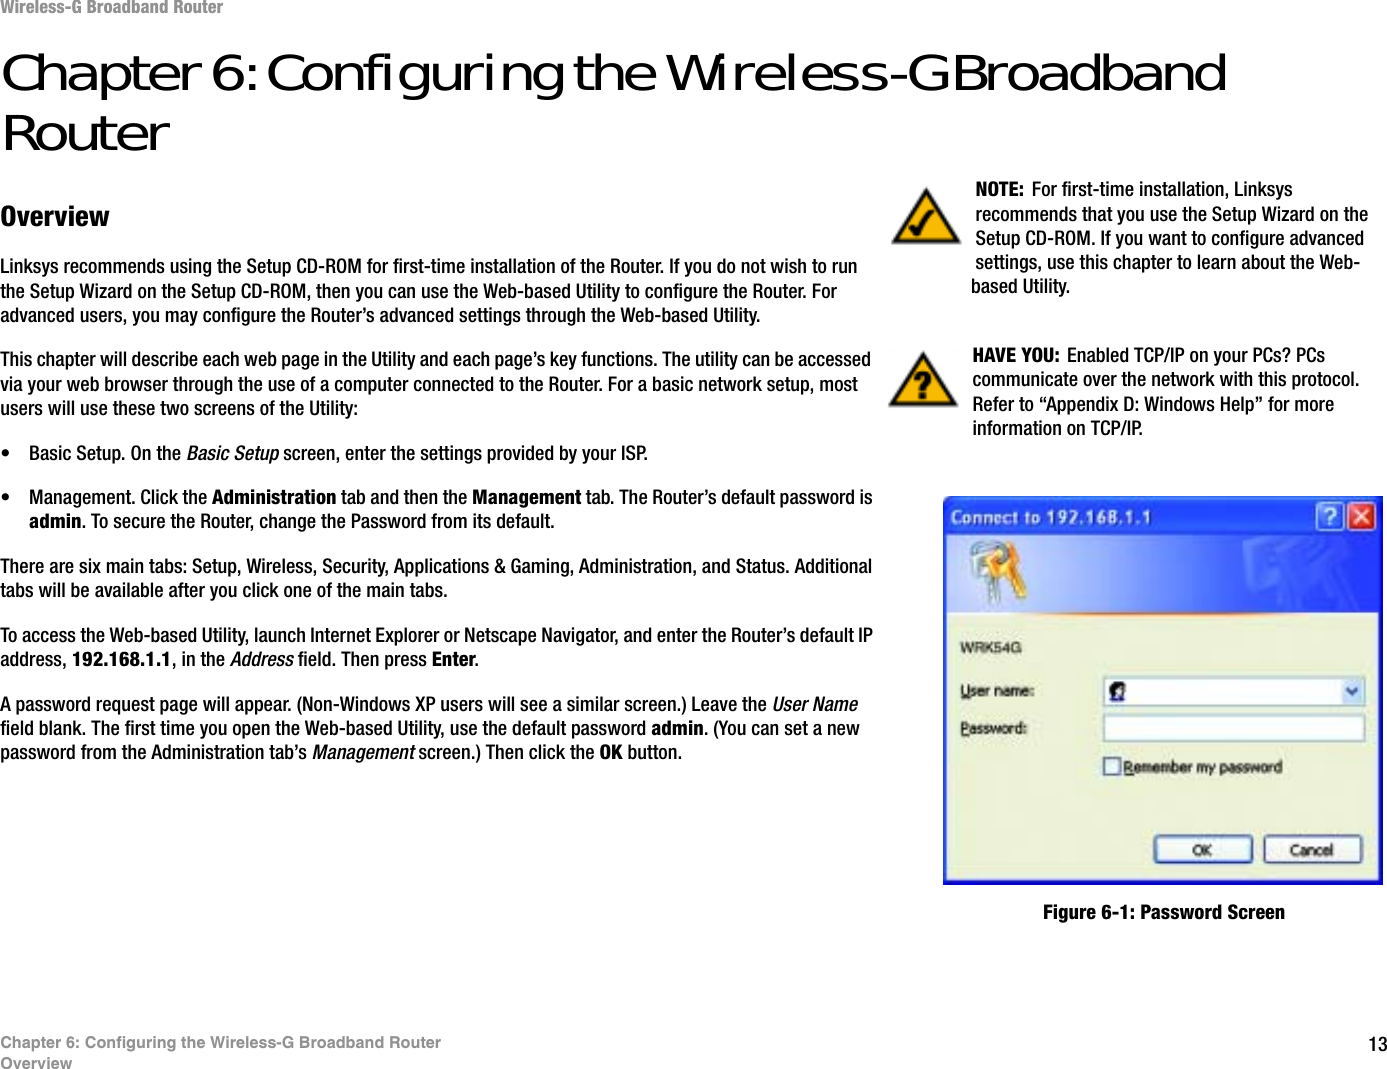 13Chapter 6: Configuring the Wireless-G Broadband RouterOverviewWireless-G Broadband RouterChapter 6: Configuring the Wireless-G Broadband RouterOverviewLinksys recommends using the Setup CD-ROM for first-time installation of the Router. If you do not wish to run the Setup Wizard on the Setup CD-ROM, then you can use the Web-based Utility to configure the Router. For advanced users, you may configure the Router’s advanced settings through the Web-based Utility.This chapter will describe each web page in the Utility and each page’s key functions. The utility can be accessed via your web browser through the use of a computer connected to the Router. For a basic network setup, most users will use these two screens of the Utility:• Basic Setup. On the Basic Setup screen, enter the settings provided by your ISP.• Management. Click the Administration tab and then the Management tab. The Router’s default password is admin. To secure the Router, change the Password from its default.There are six main tabs: Setup, Wireless, Security, Applications &amp; Gaming, Administration, and Status. Additional tabs will be available after you click one of the main tabs.To access the Web-based Utility, launch Internet Explorer or Netscape Navigator, and enter the Router’s default IP address, 192.168.1.1, in the Address field. Then press Enter.A password request page will appear. (Non-Windows XP users will see a similar screen.) Leave the User Namefield blank. The first time you open the Web-based Utility, use the default password admin. (You can set a new password from the Administration tab’s Management screen.) Then click the OK button. HAVE YOU: Enabled TCP/IP on your PCs? PCs communicate over the network with this protocol. Refer to “Appendix D: Windows Help” for more information on TCP/IP.NOTE: For first-time installation, Linksys recommends that you use the Setup Wizard on the Setup CD-ROM. If you want to configure advanced settings, use this chapter to learn about the Web-based Utility.Figure 6-1: Password Screen